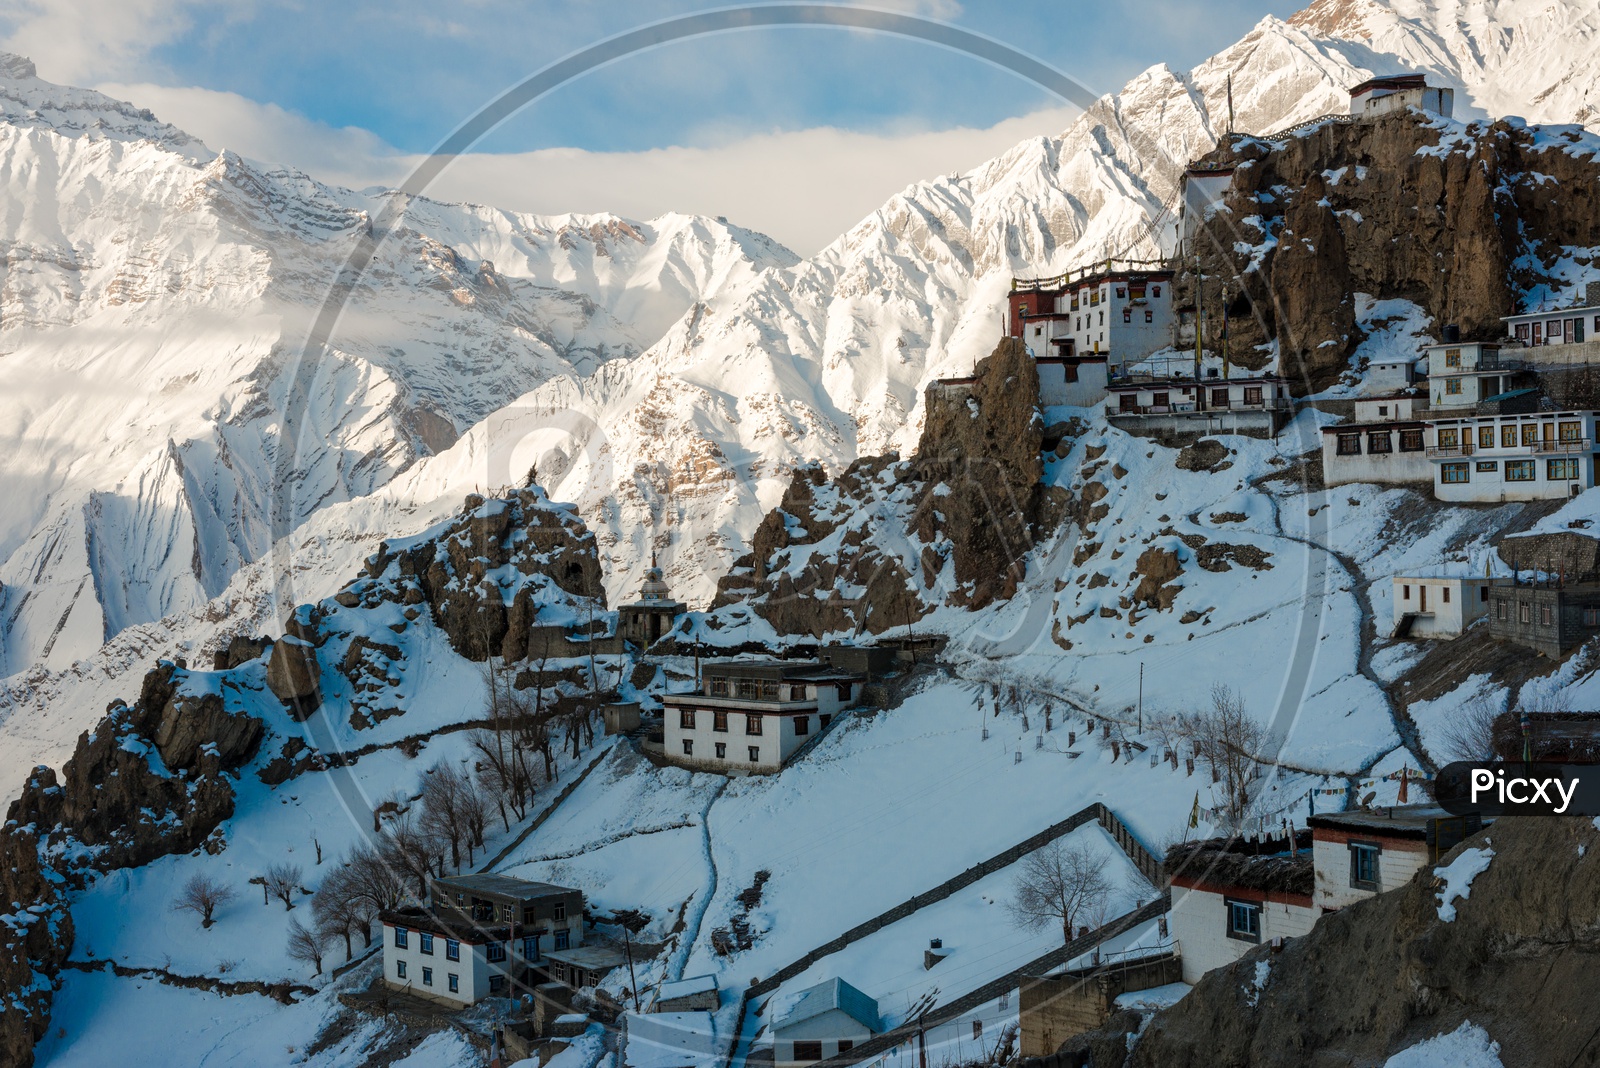 Dhankar Village on Mountains with Snow in Winter at Himalayas